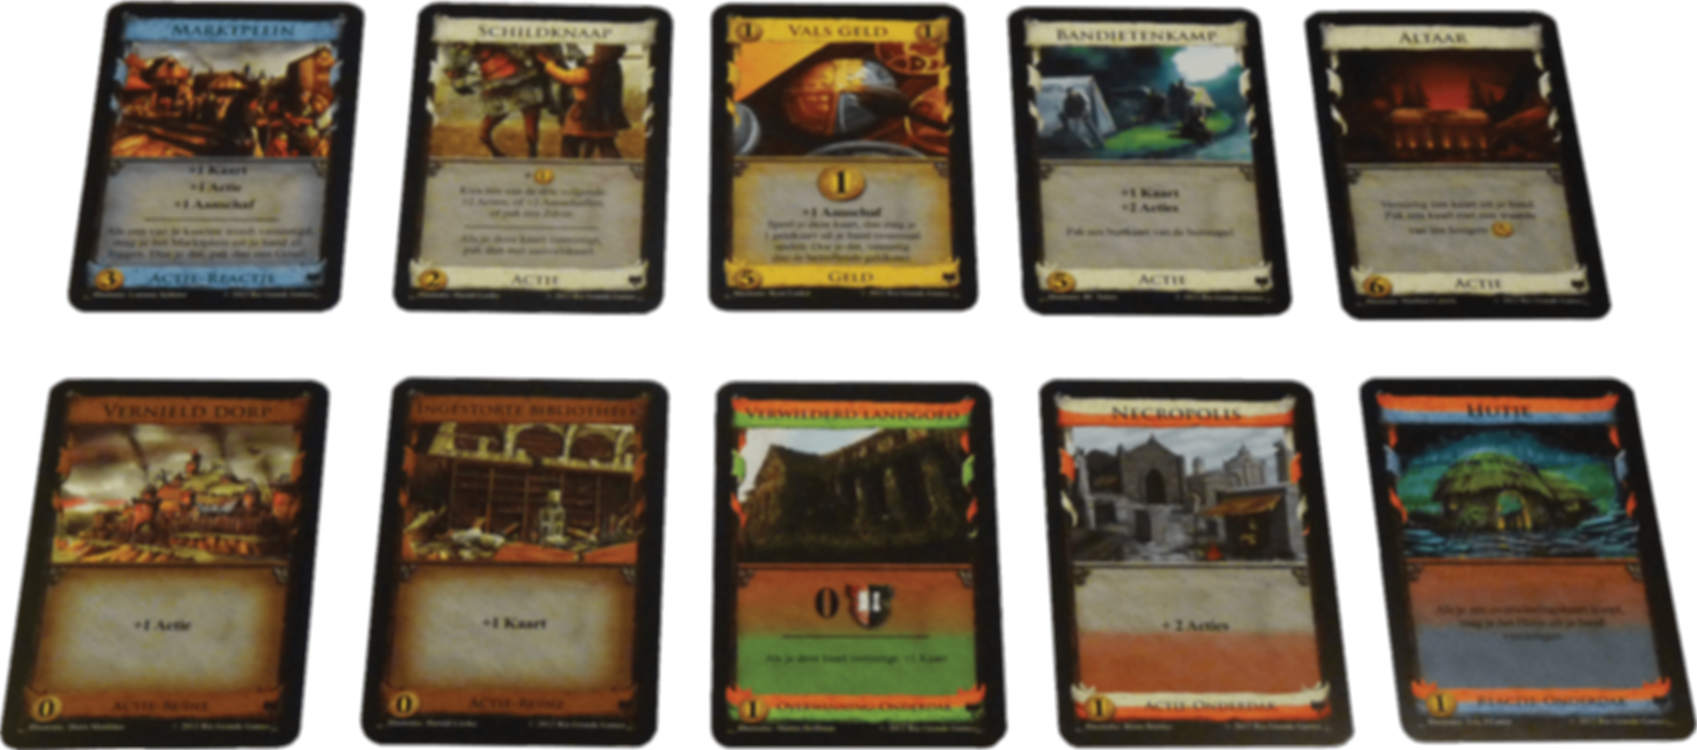 Dominion: Dark Ages cards